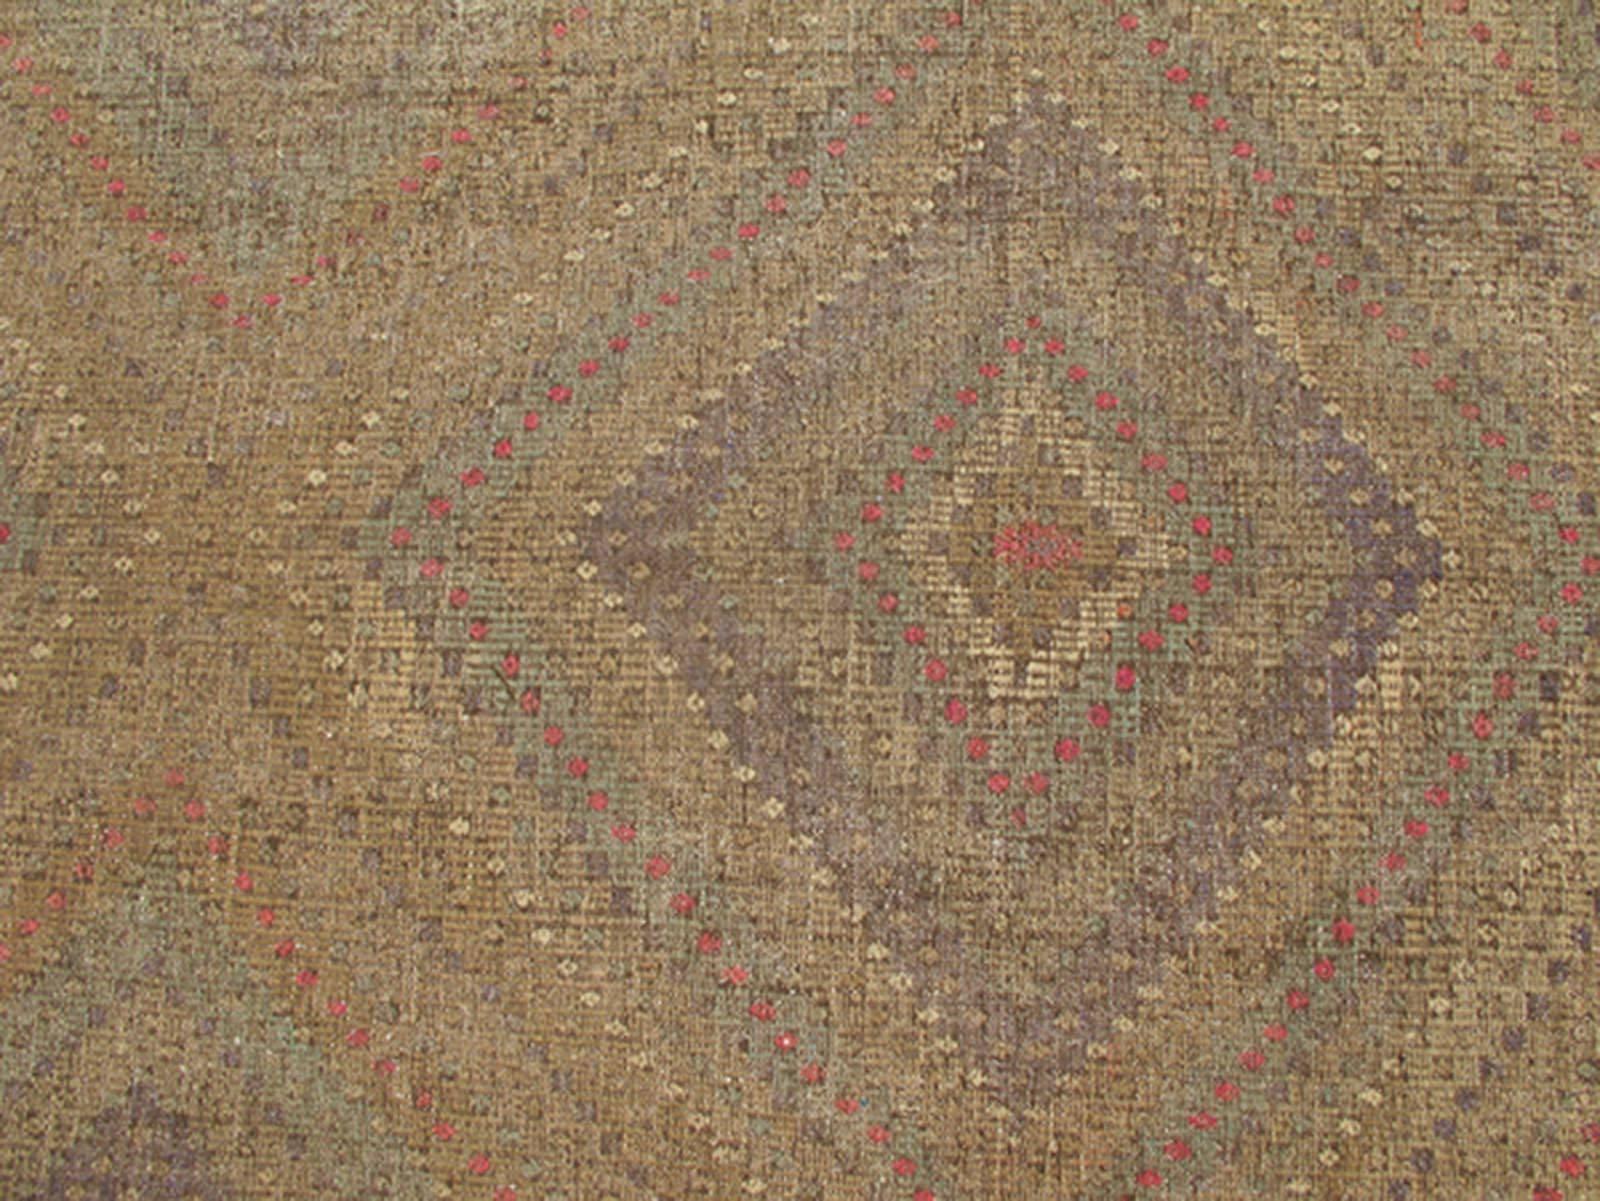 Turkish Kilim Rug with Multi Layered Diamond Design in soft tones of Blue, Green In Excellent Condition For Sale In Atlanta, GA